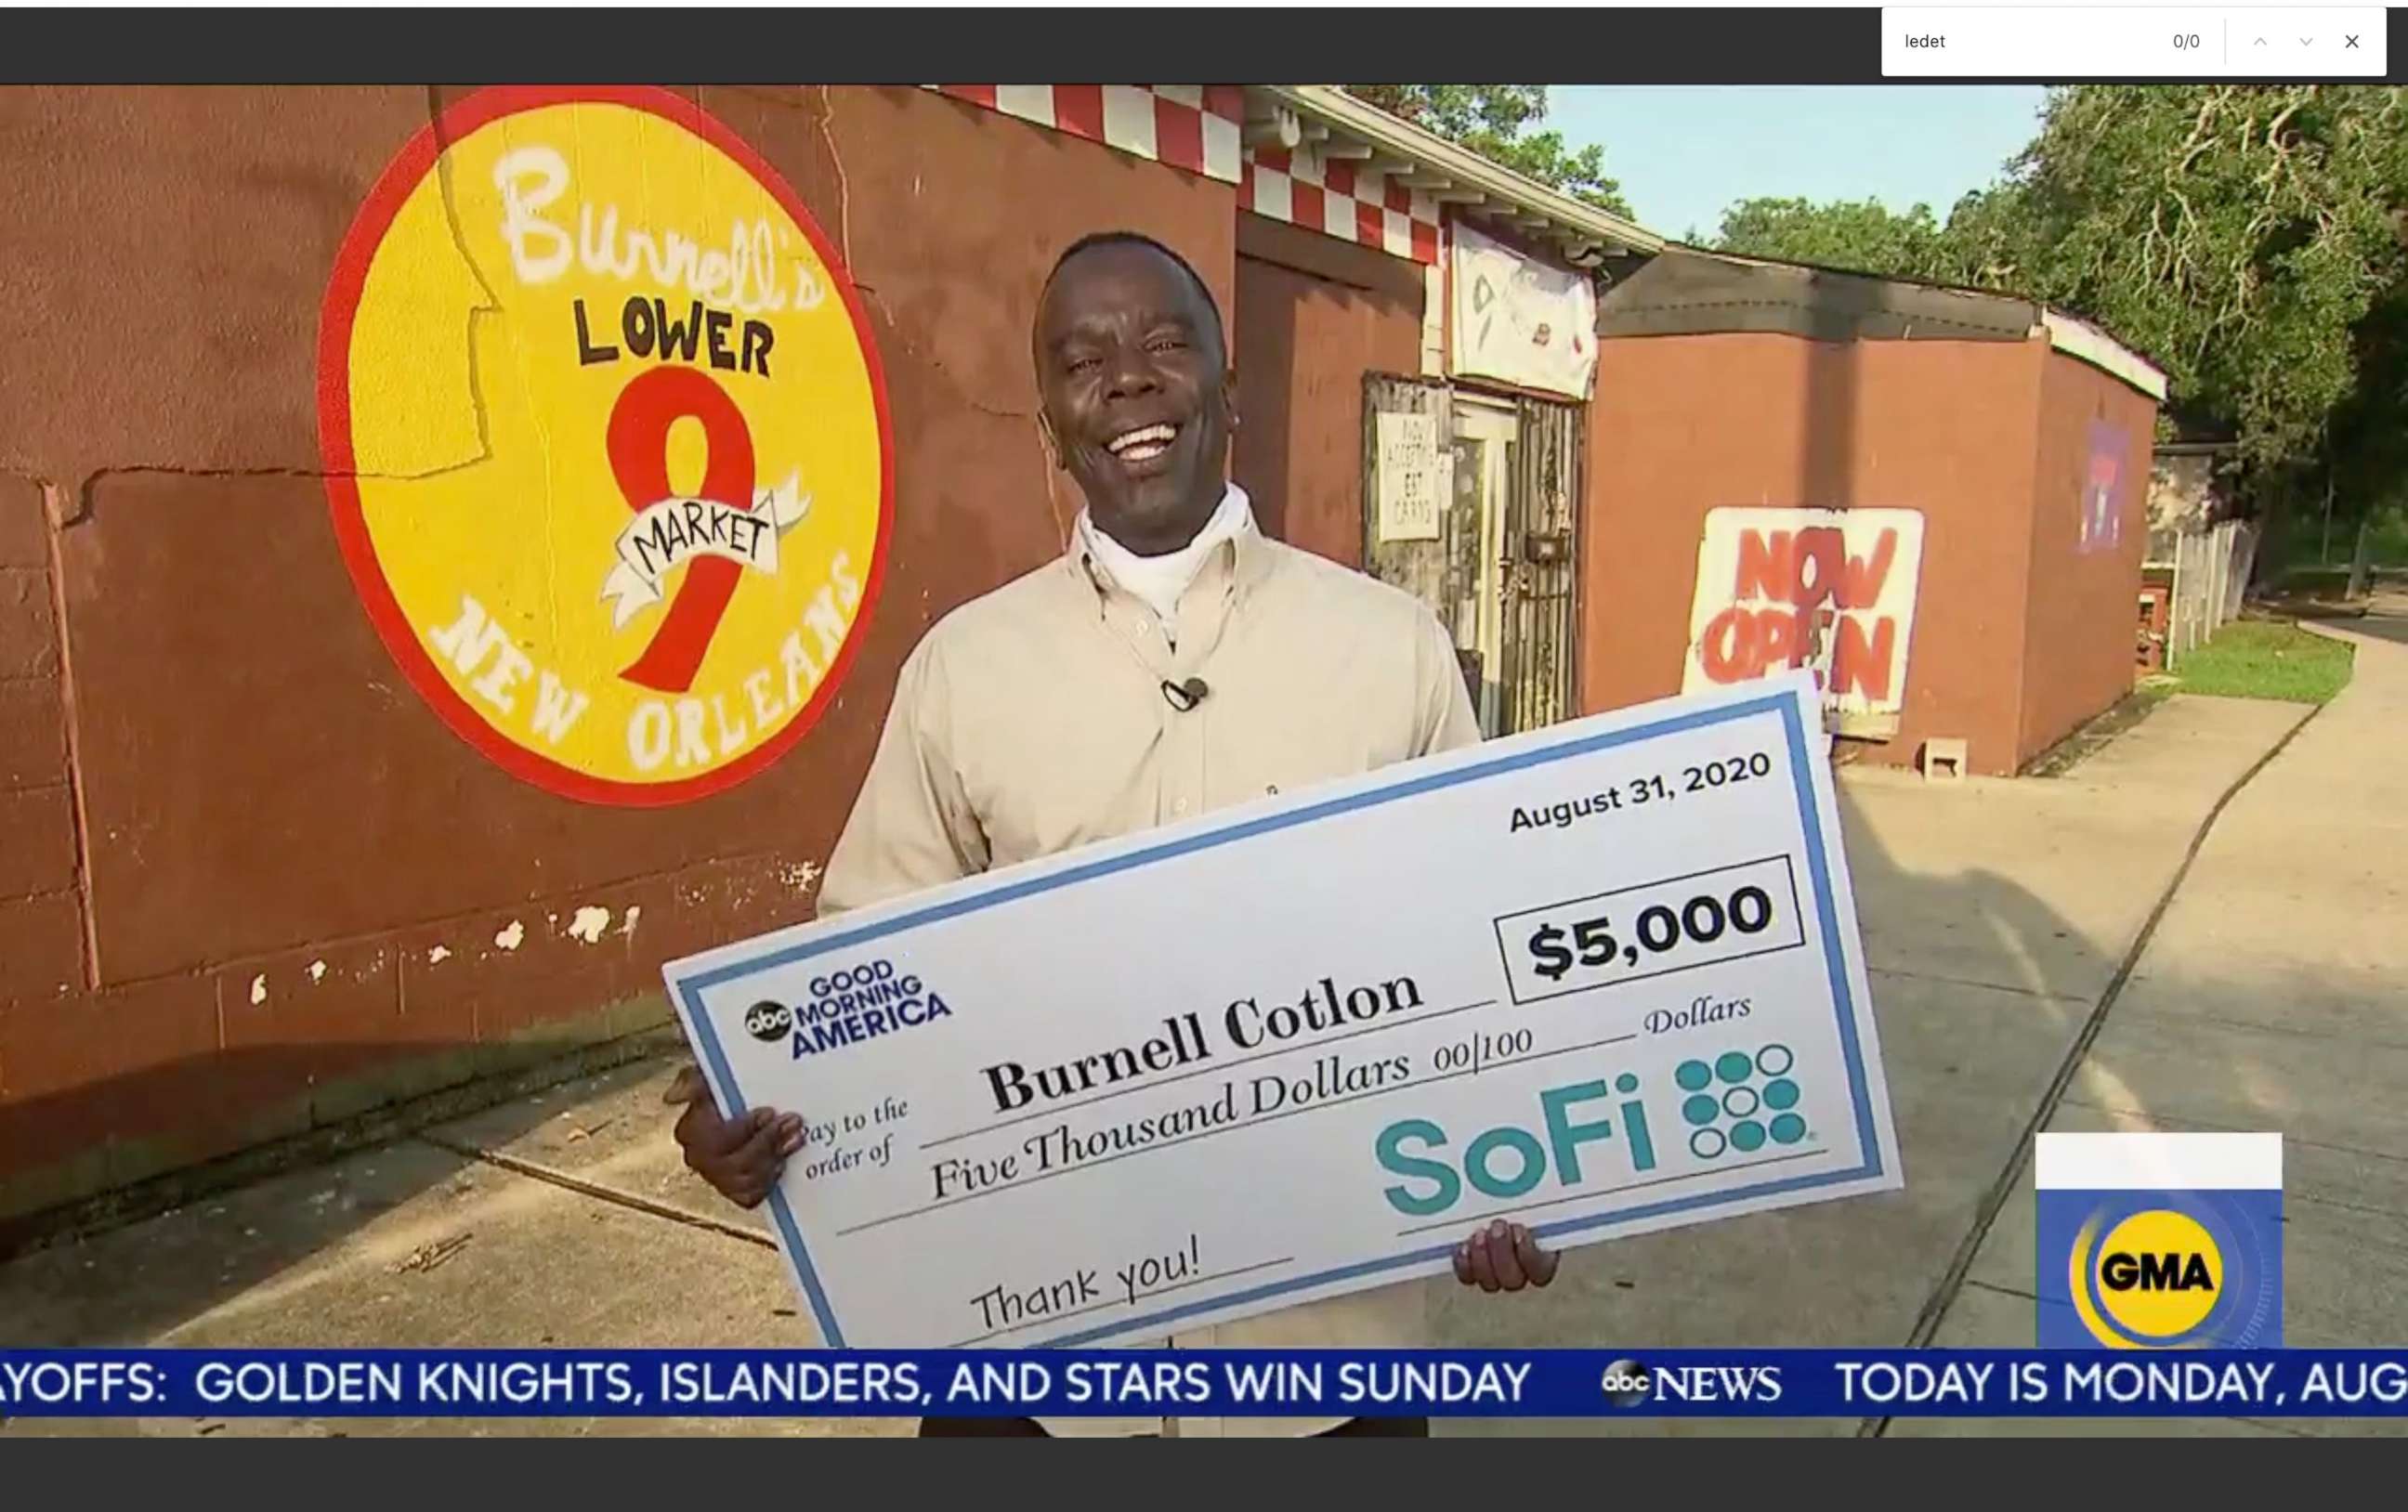 PHOTO: Burnell Cotlon receives a donation live on "Good Morning America" for his grocery store to help residents amid the COVID-19 pandemic pay for groceries. 